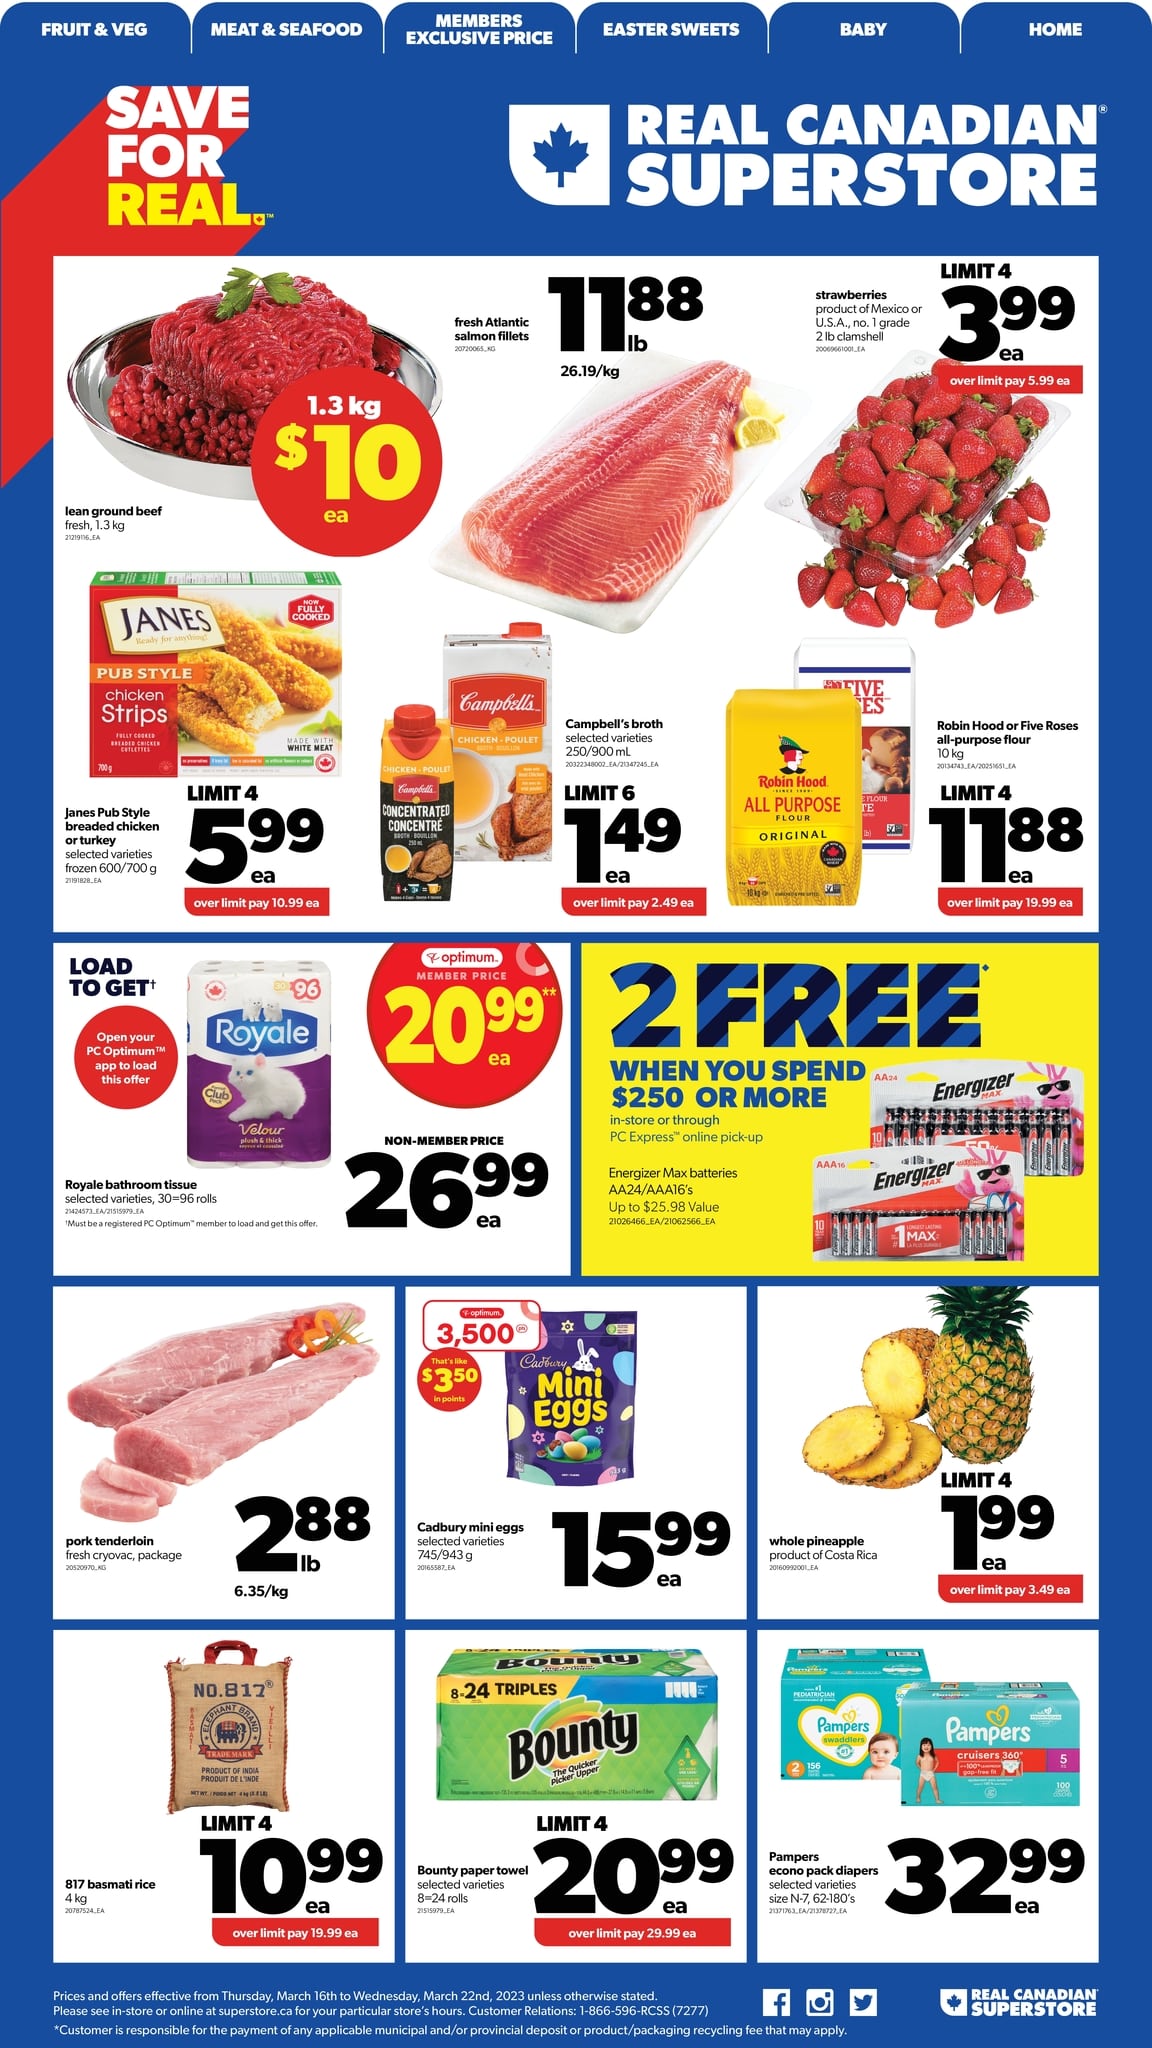 Real Canadian Superstore - Ontario - Weekly Flyer Specials - Page 1